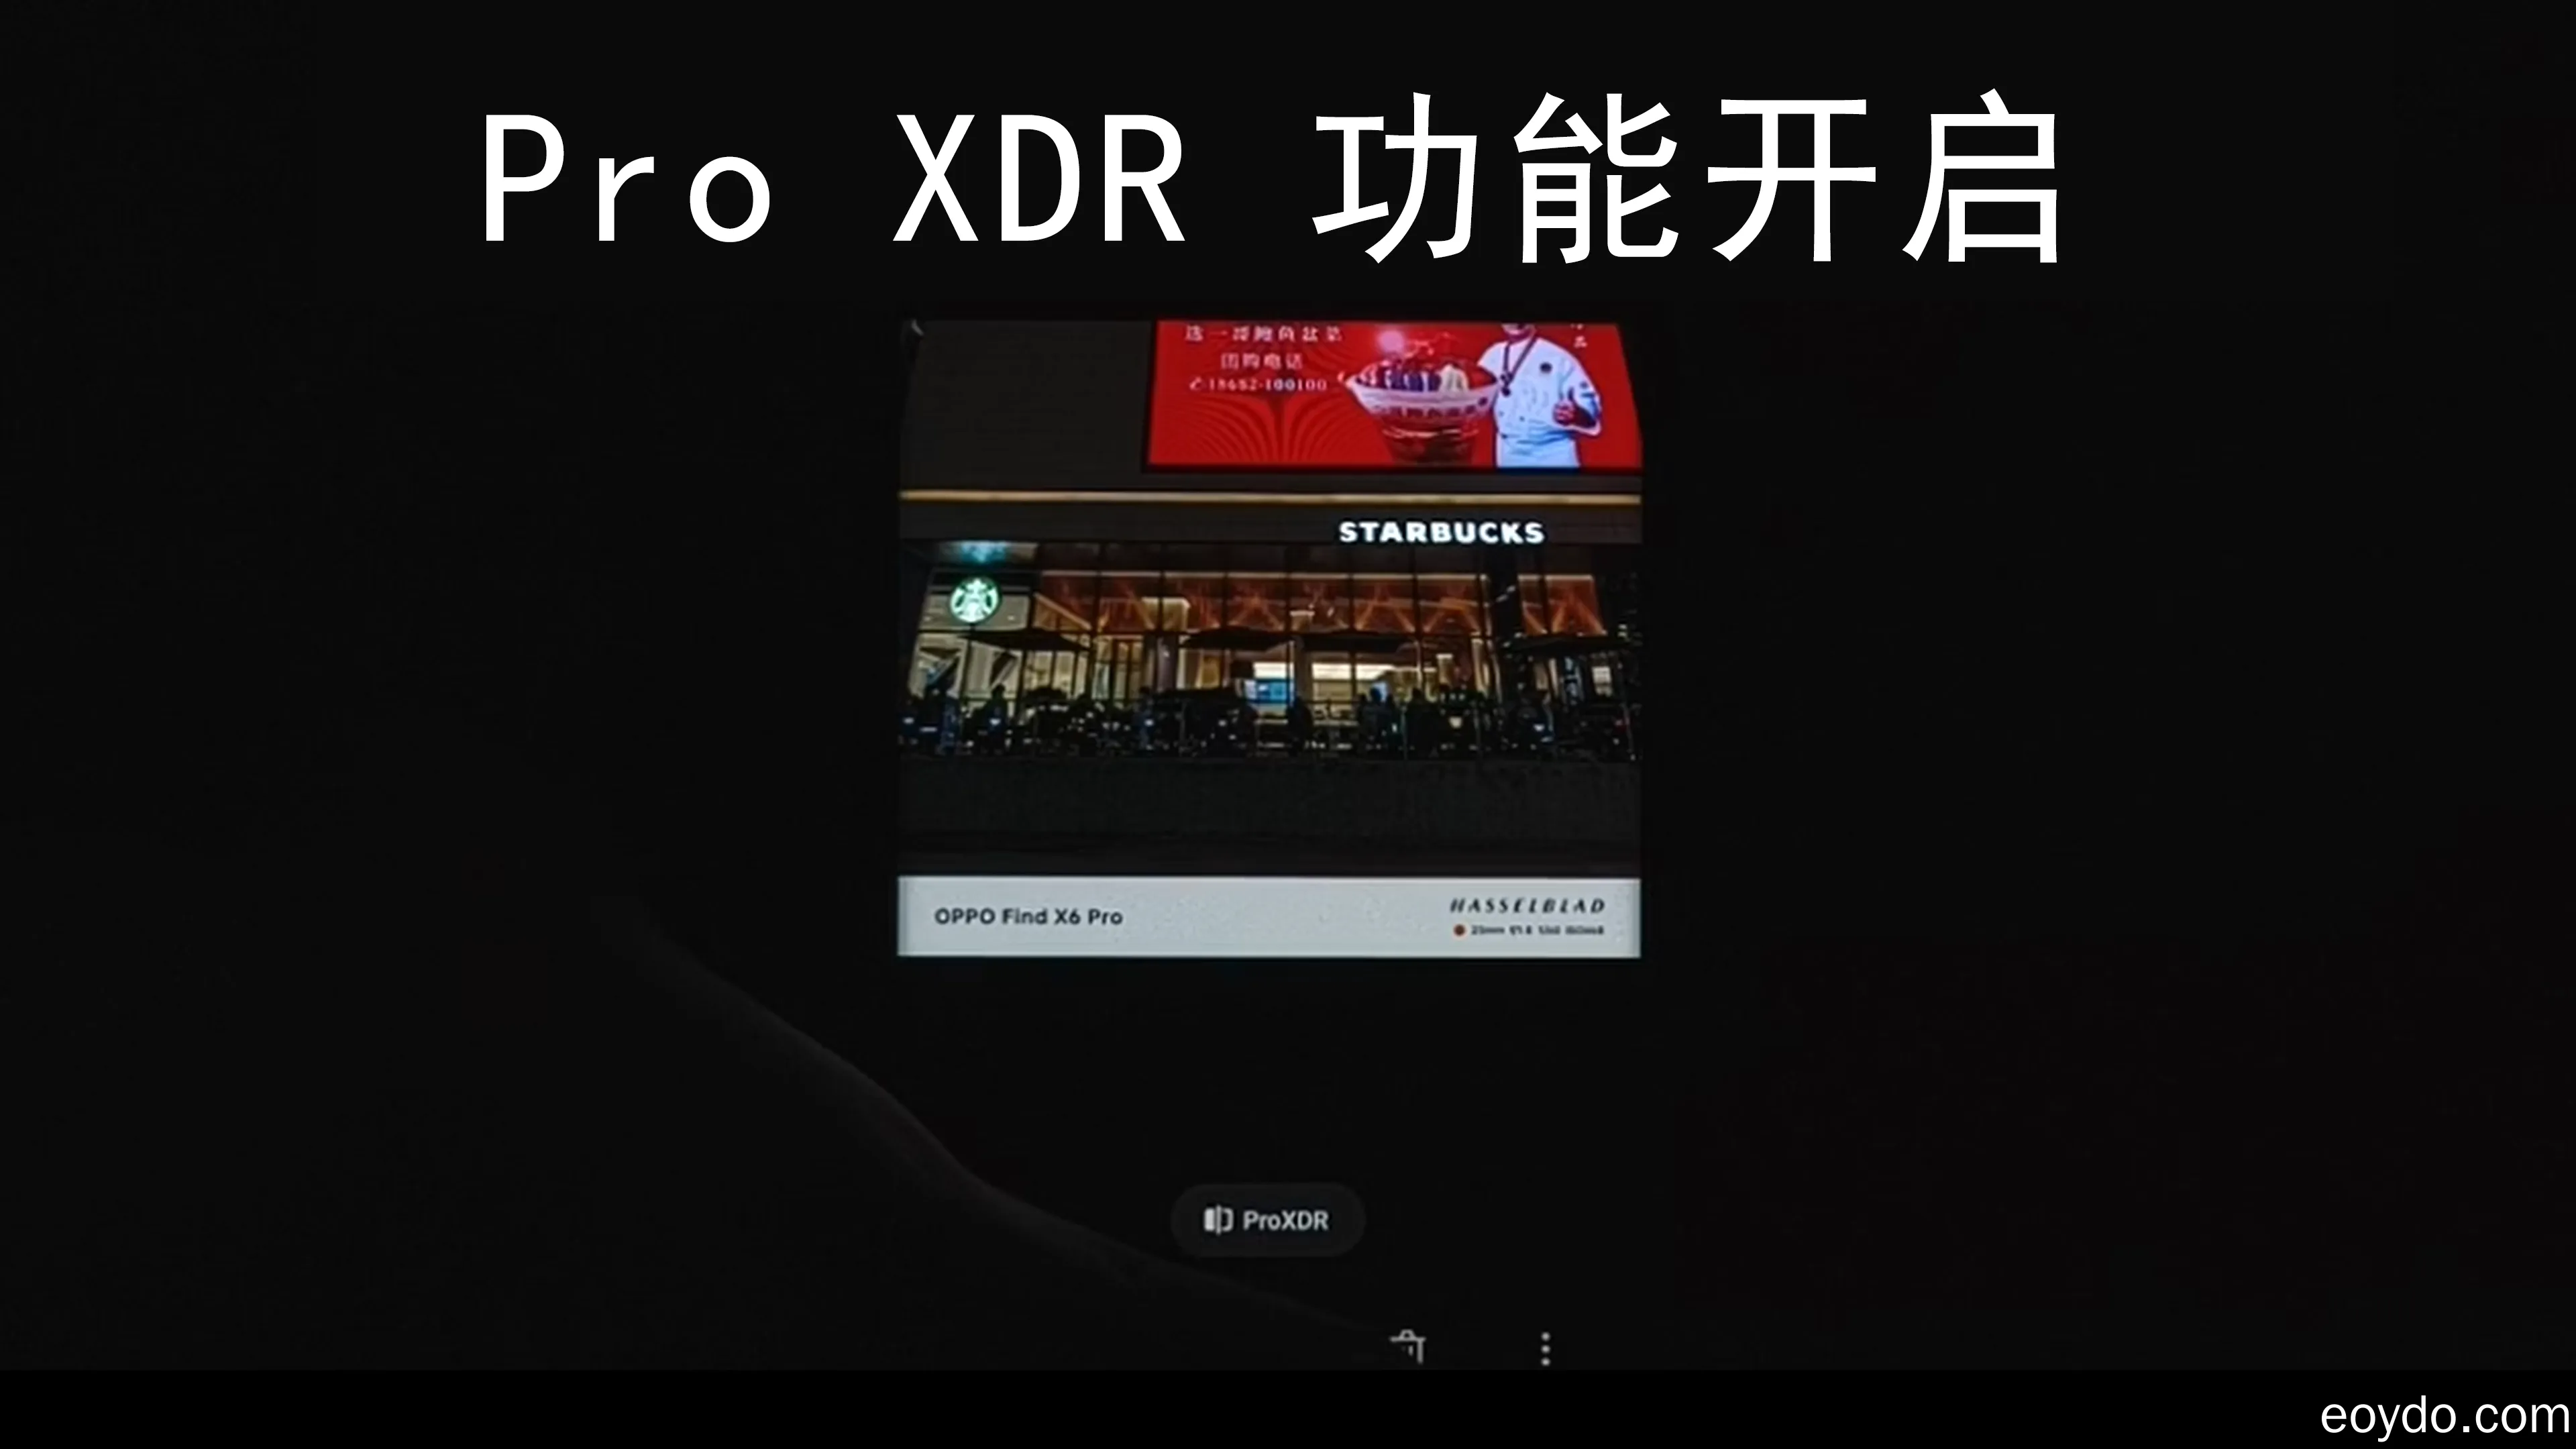 Pro XDR